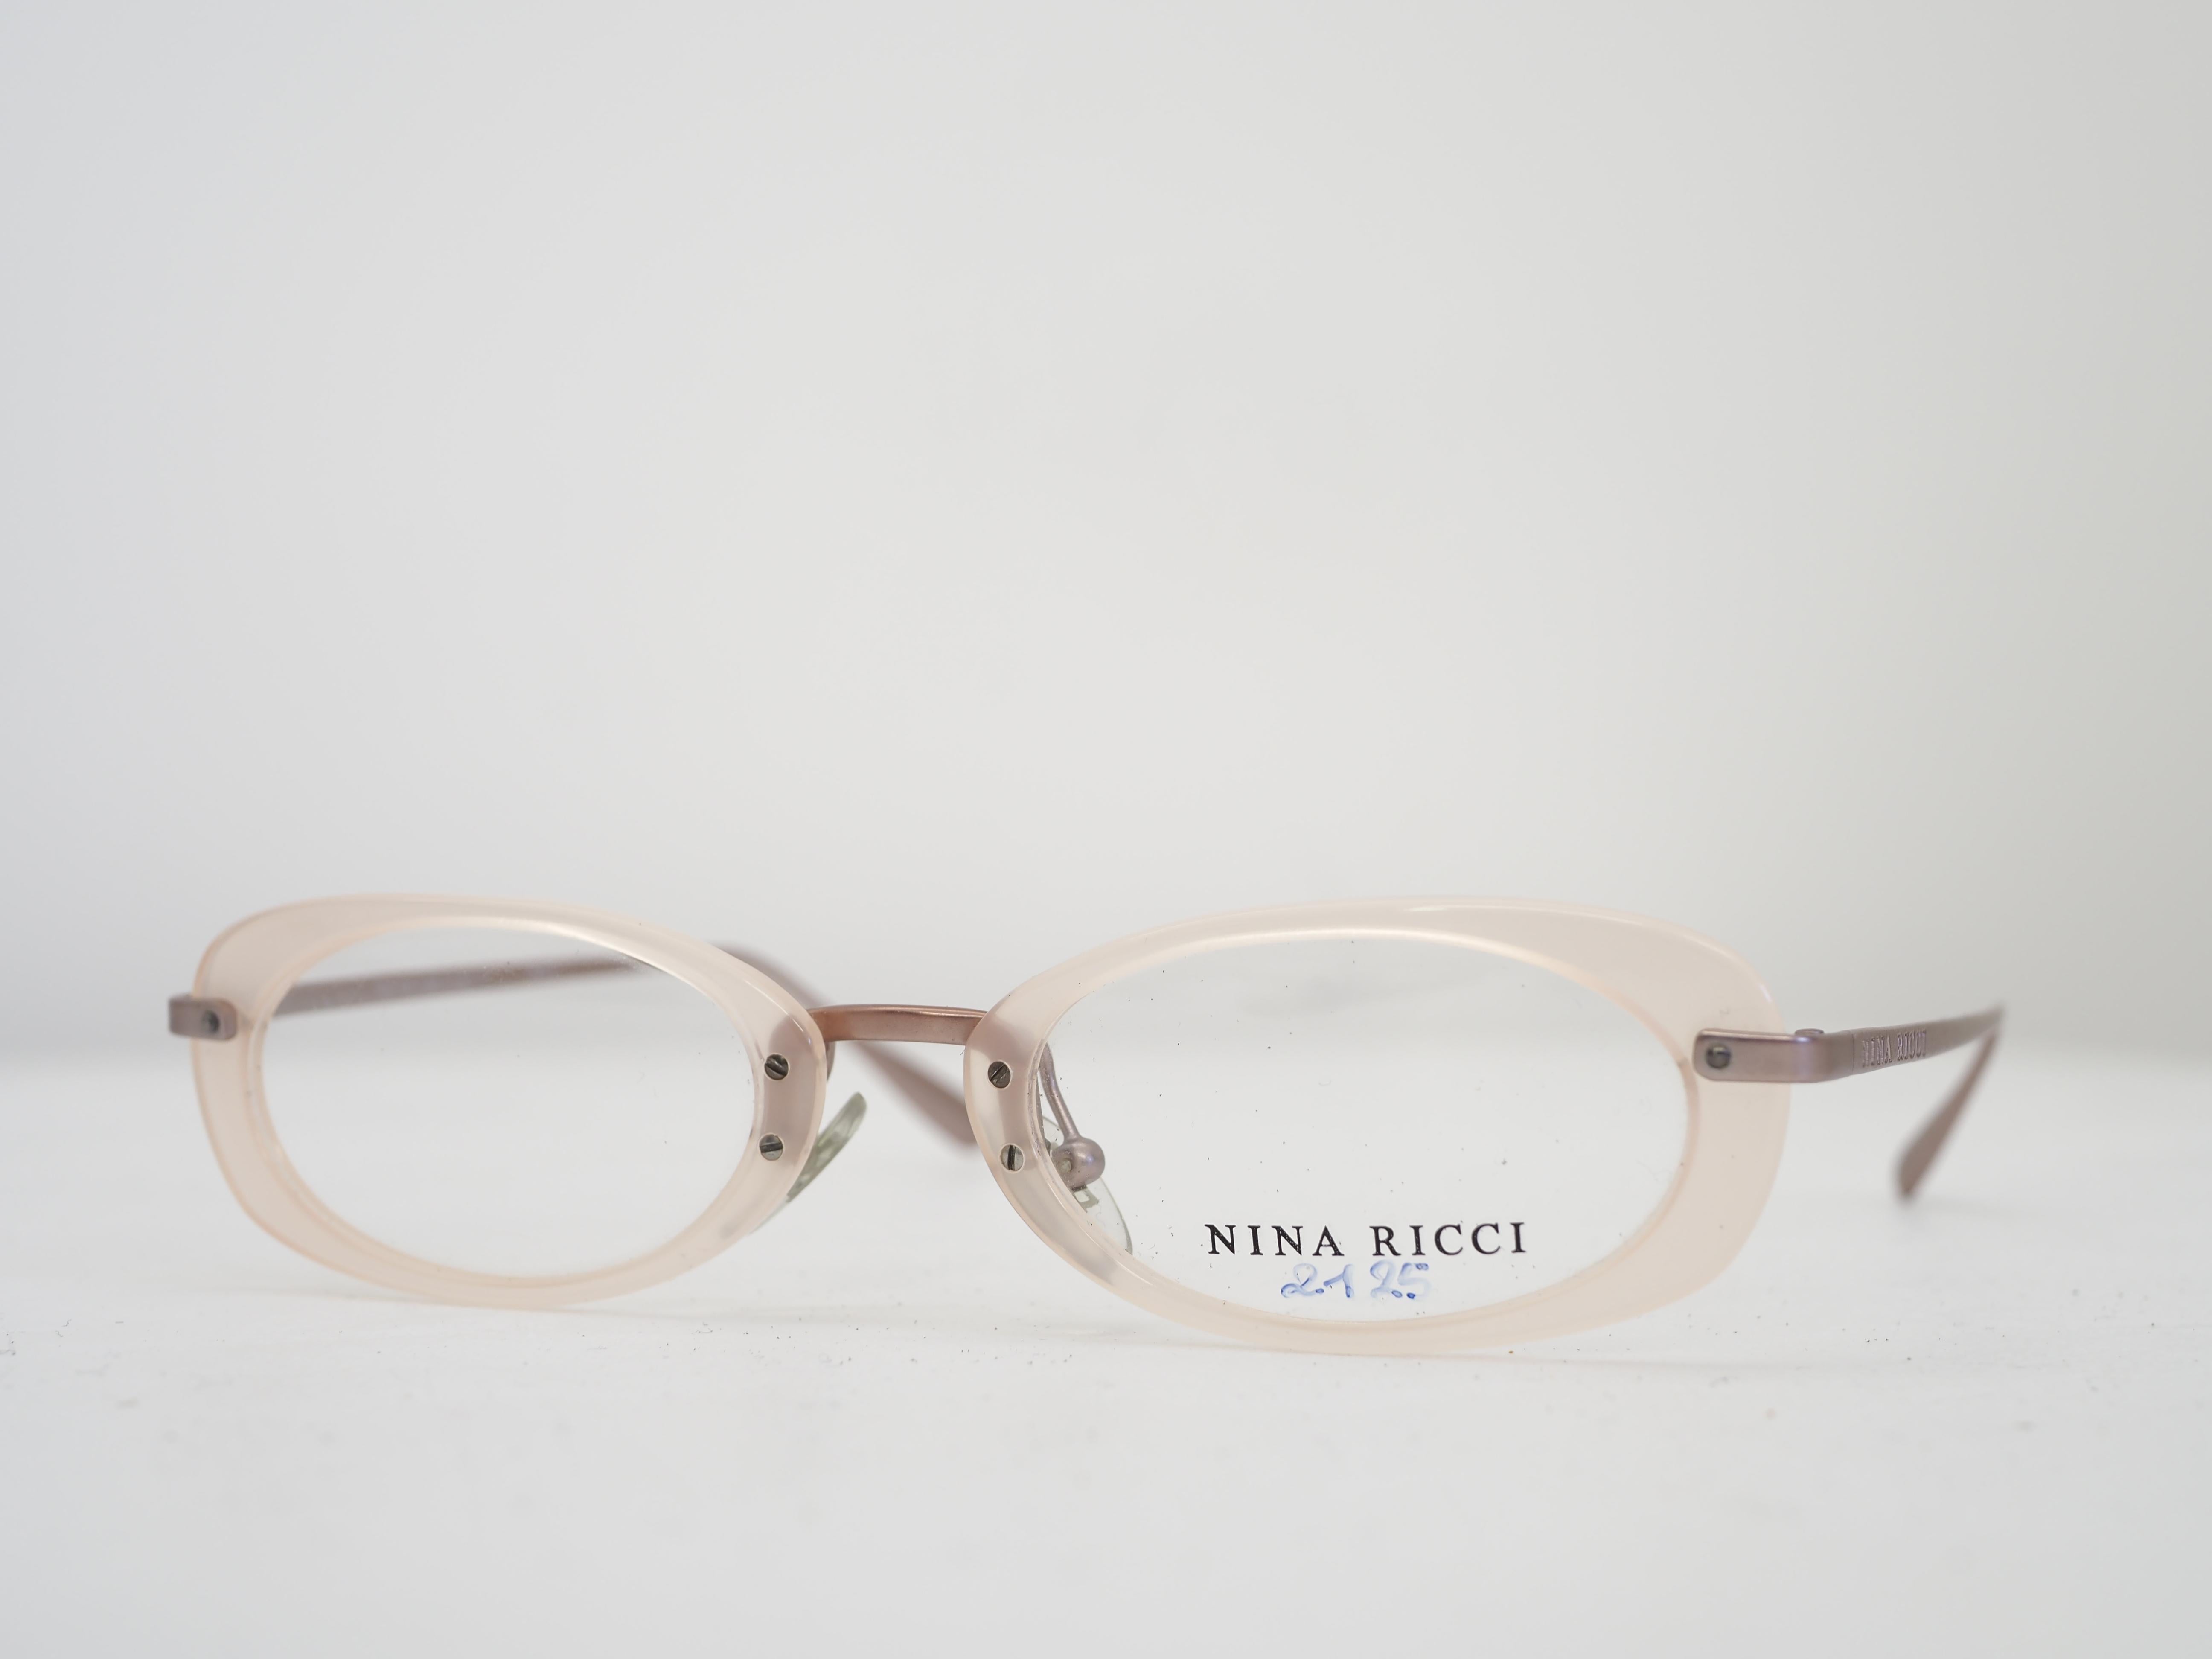 Nina Ricci vintage frame In Excellent Condition For Sale In Capri, IT